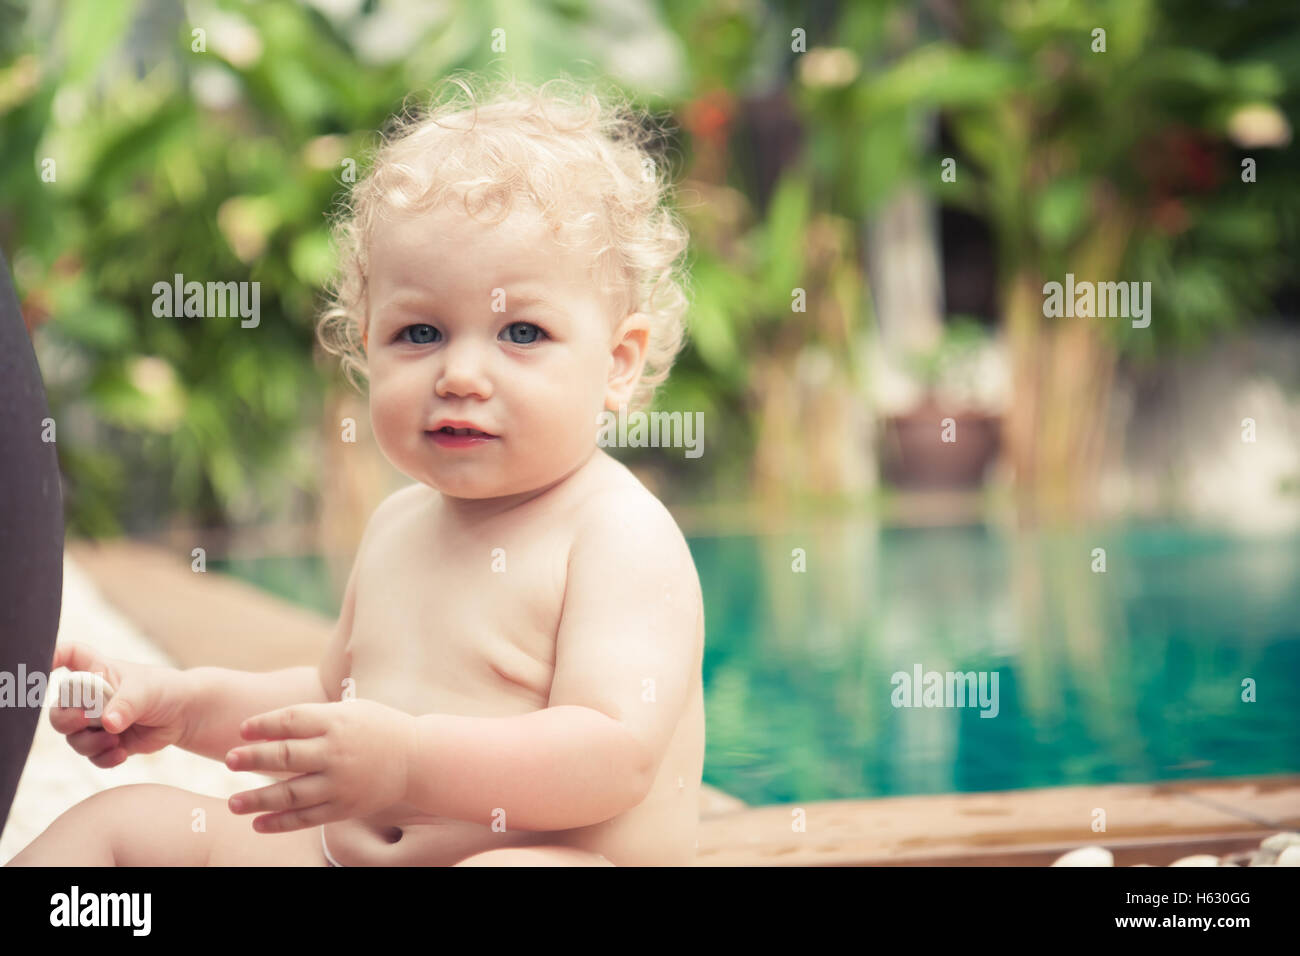 Cute little baby sitting in front of swimming pool looking at camera lors des vacances d'with copy space Banque D'Images